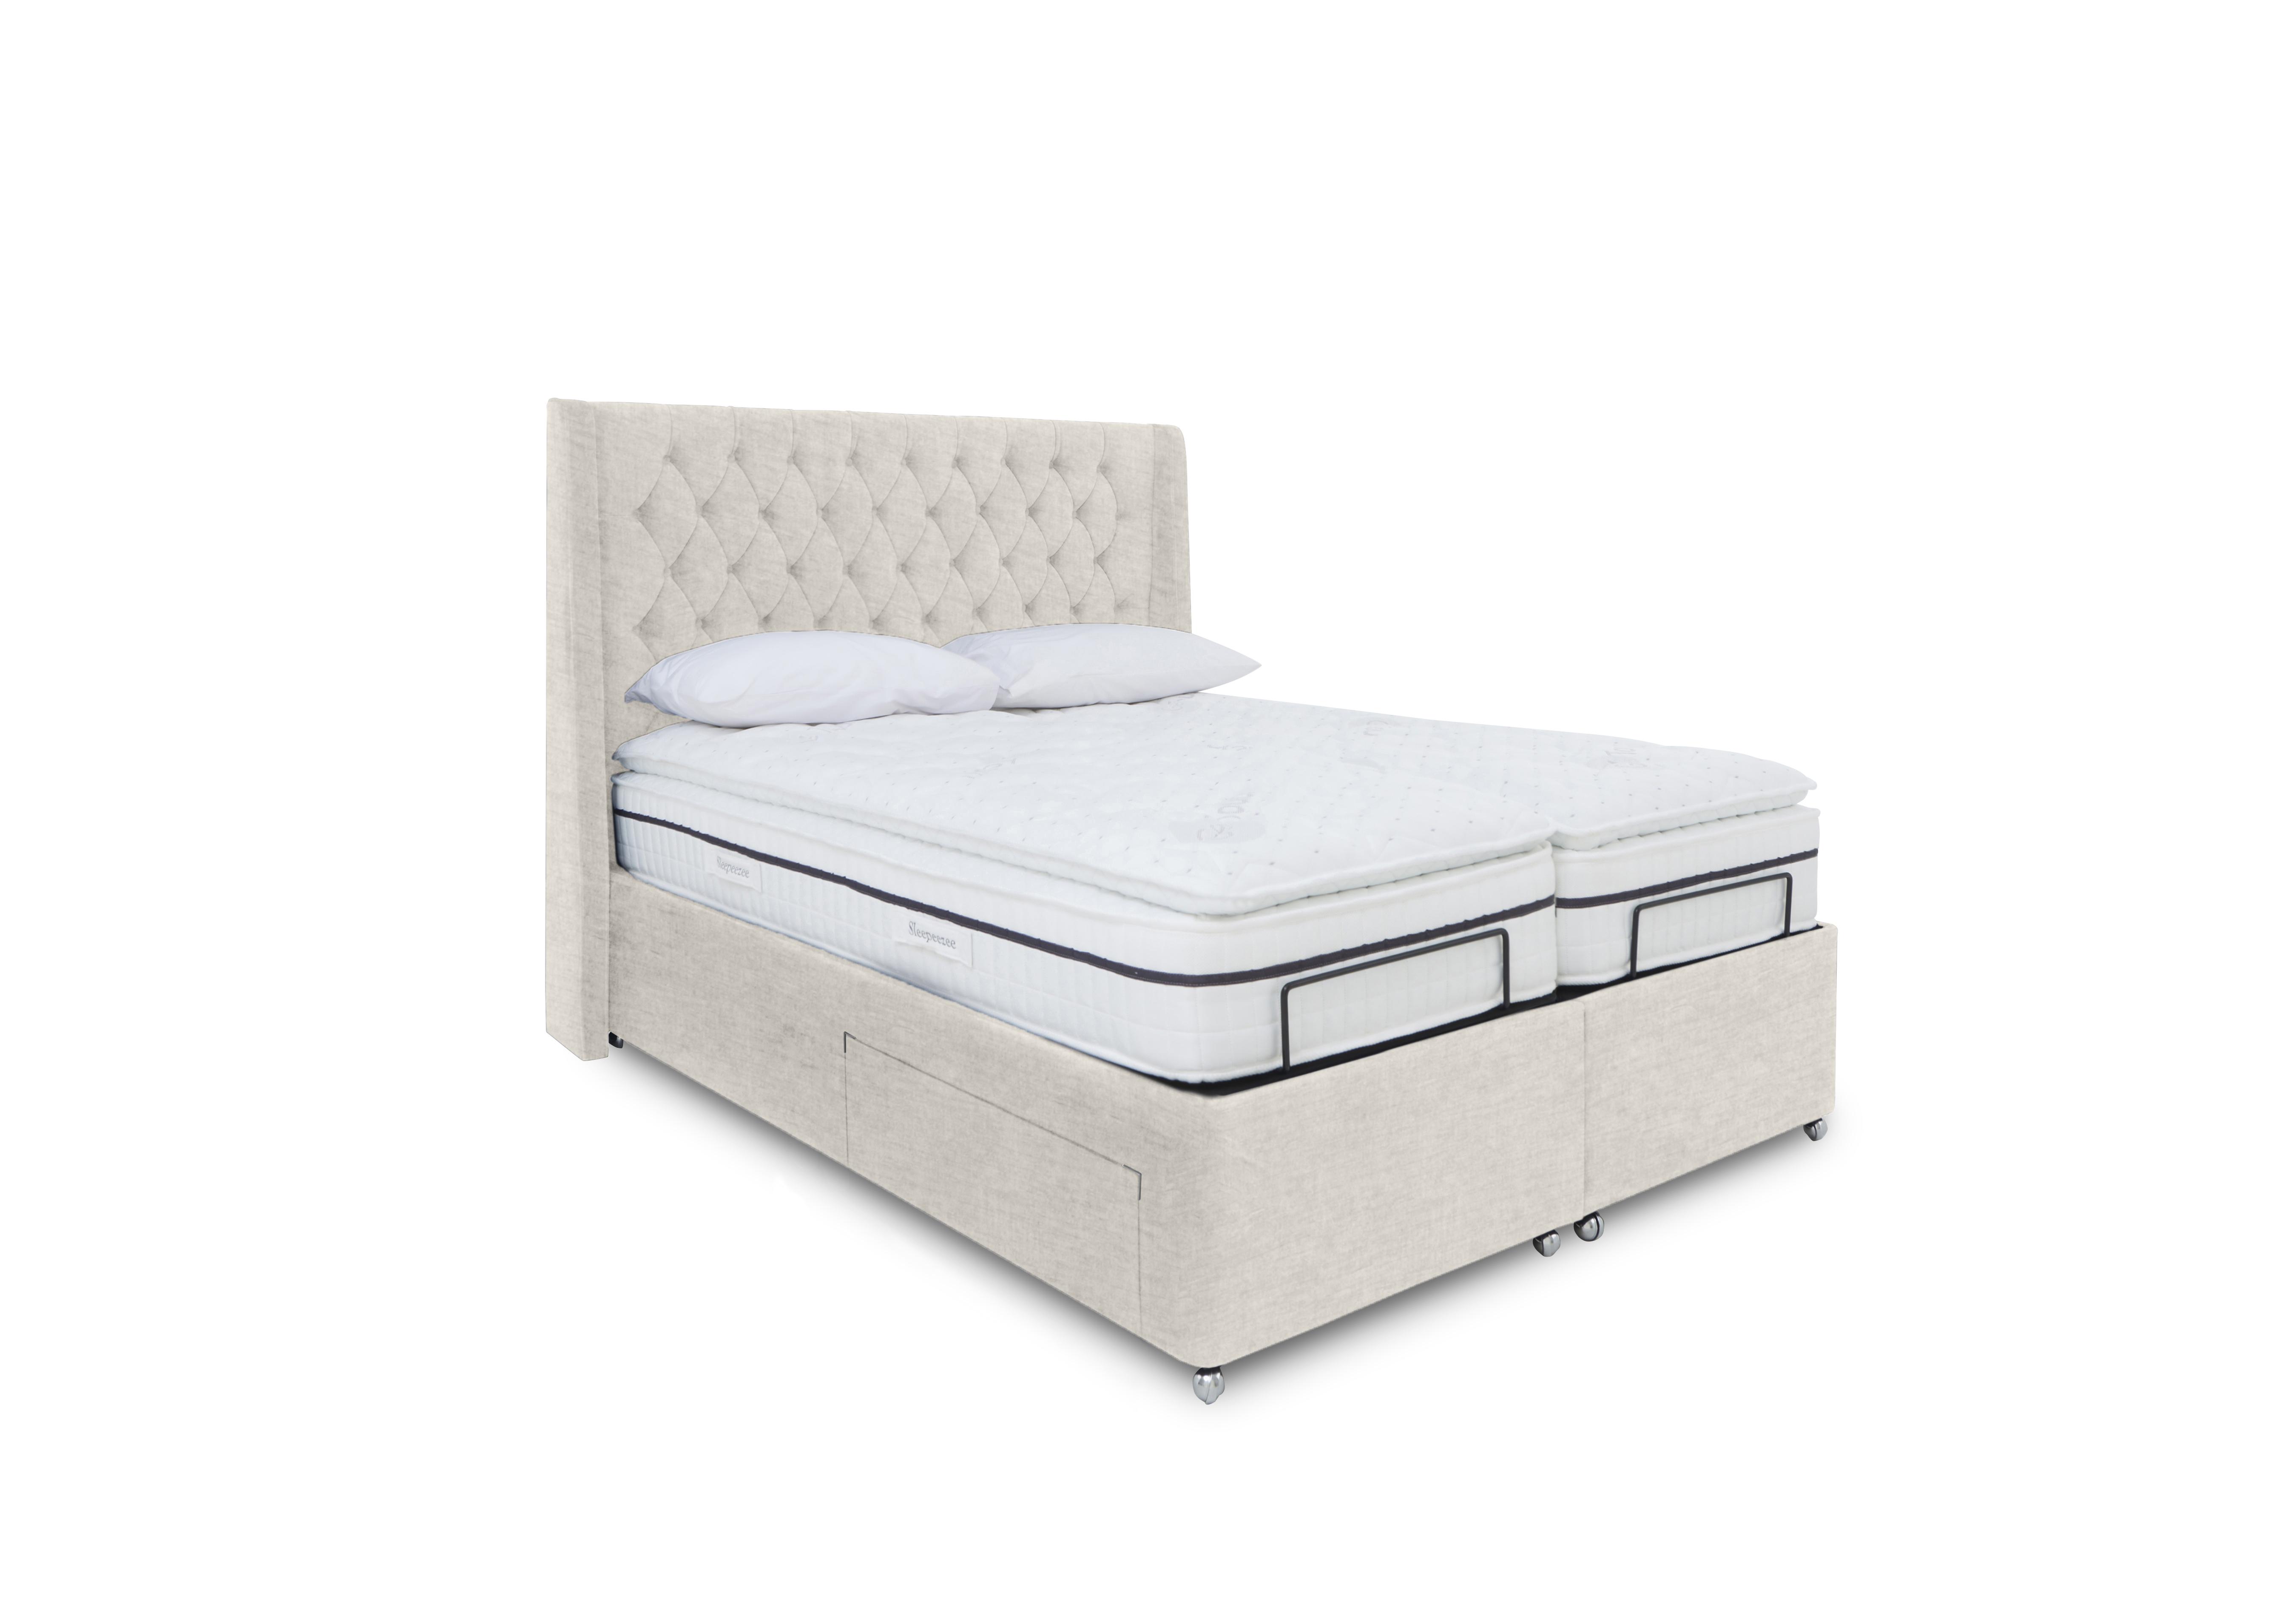 E-Motion Zen Dual Adjustable Divan Base with Massage Function and Headboard in 901 Sandstone Pearl on Furniture Village